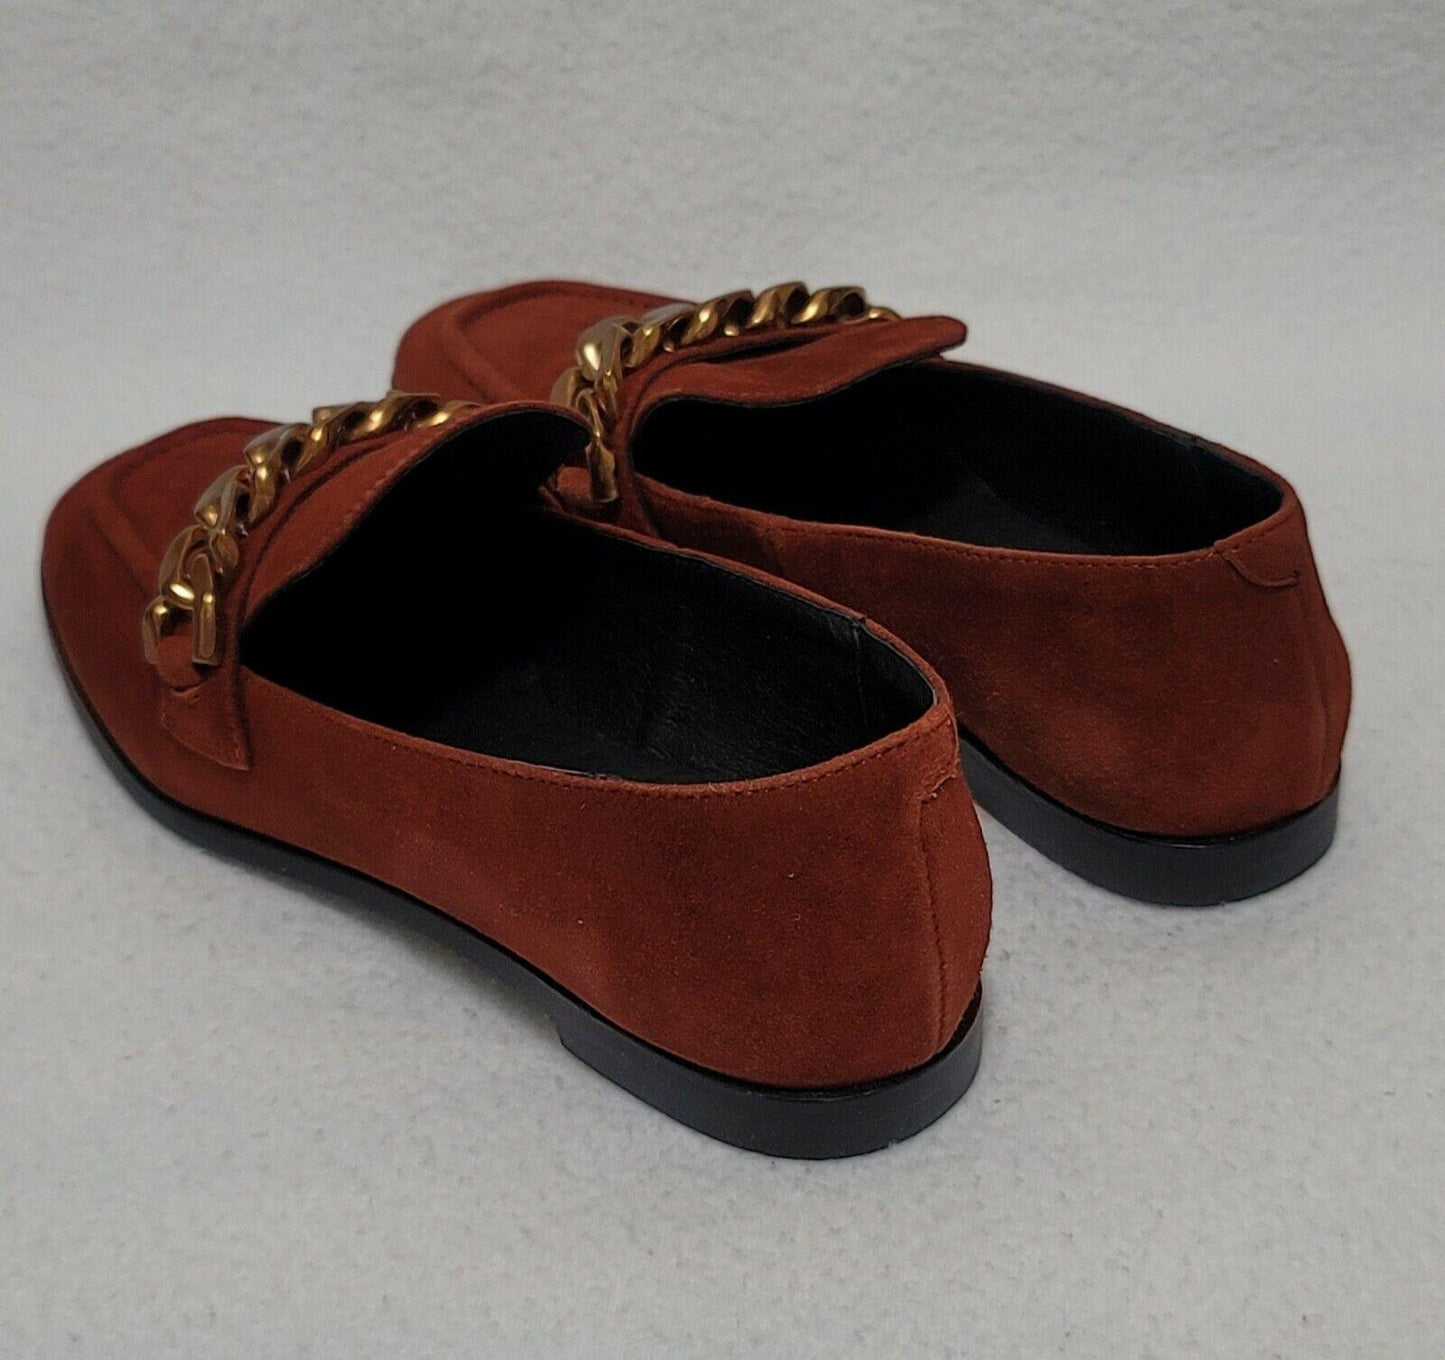 Jeffrey Campbell Woman’s Jesse Rust Suede With Chain Loafer Shoes Size US 9.5 - SVNYFancy